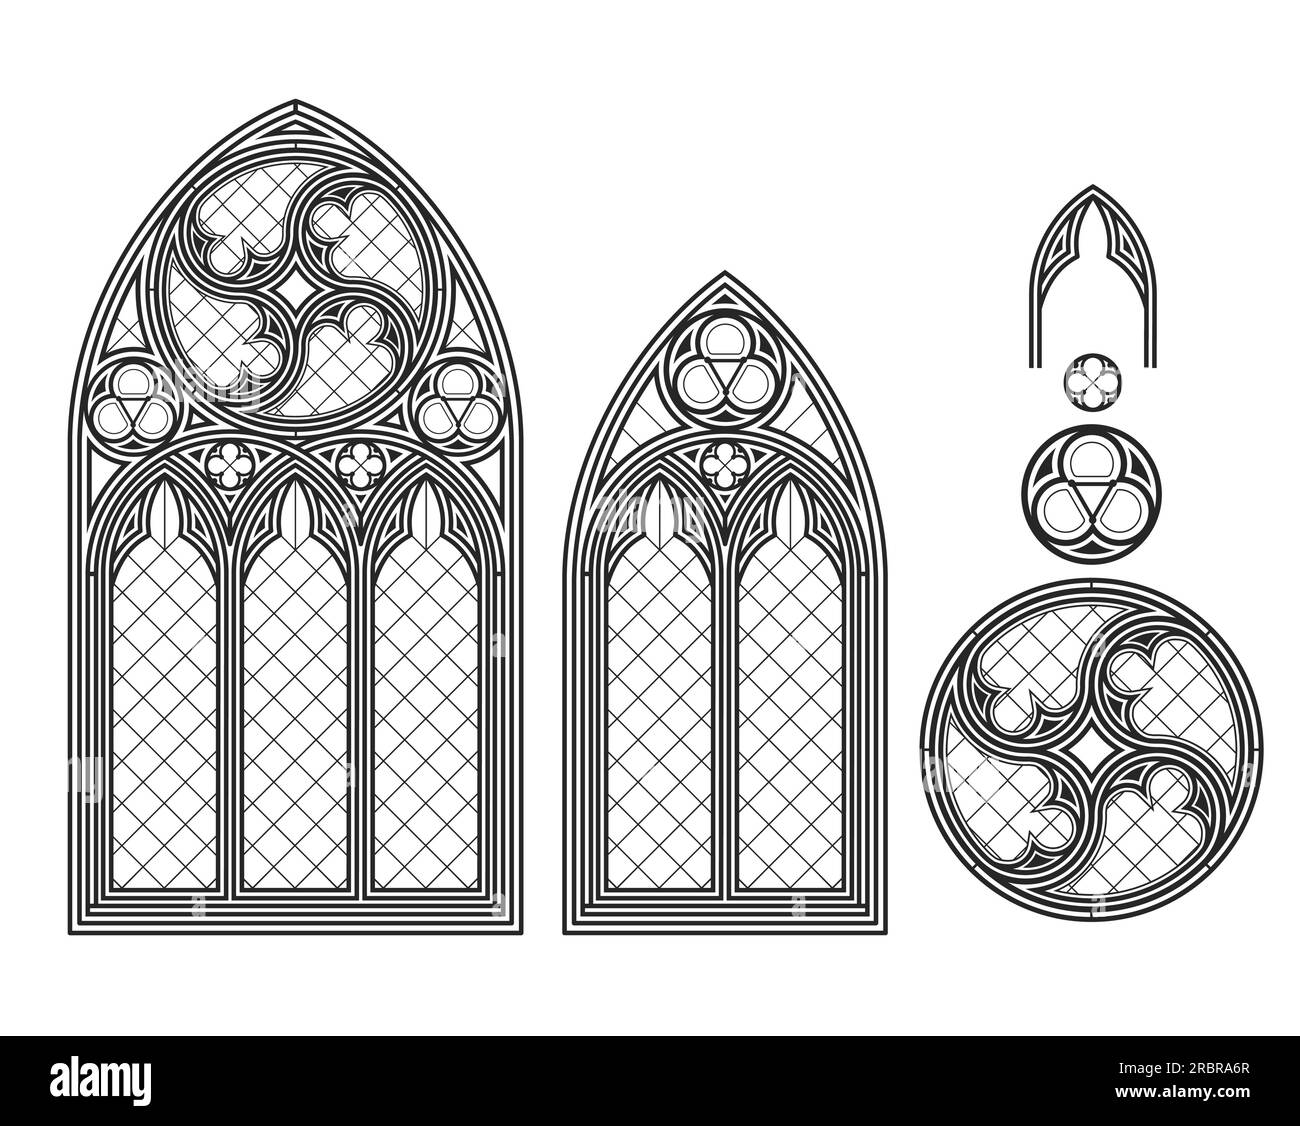 Realistic Gothic Medieval Stained Glass Window Background Or Texture